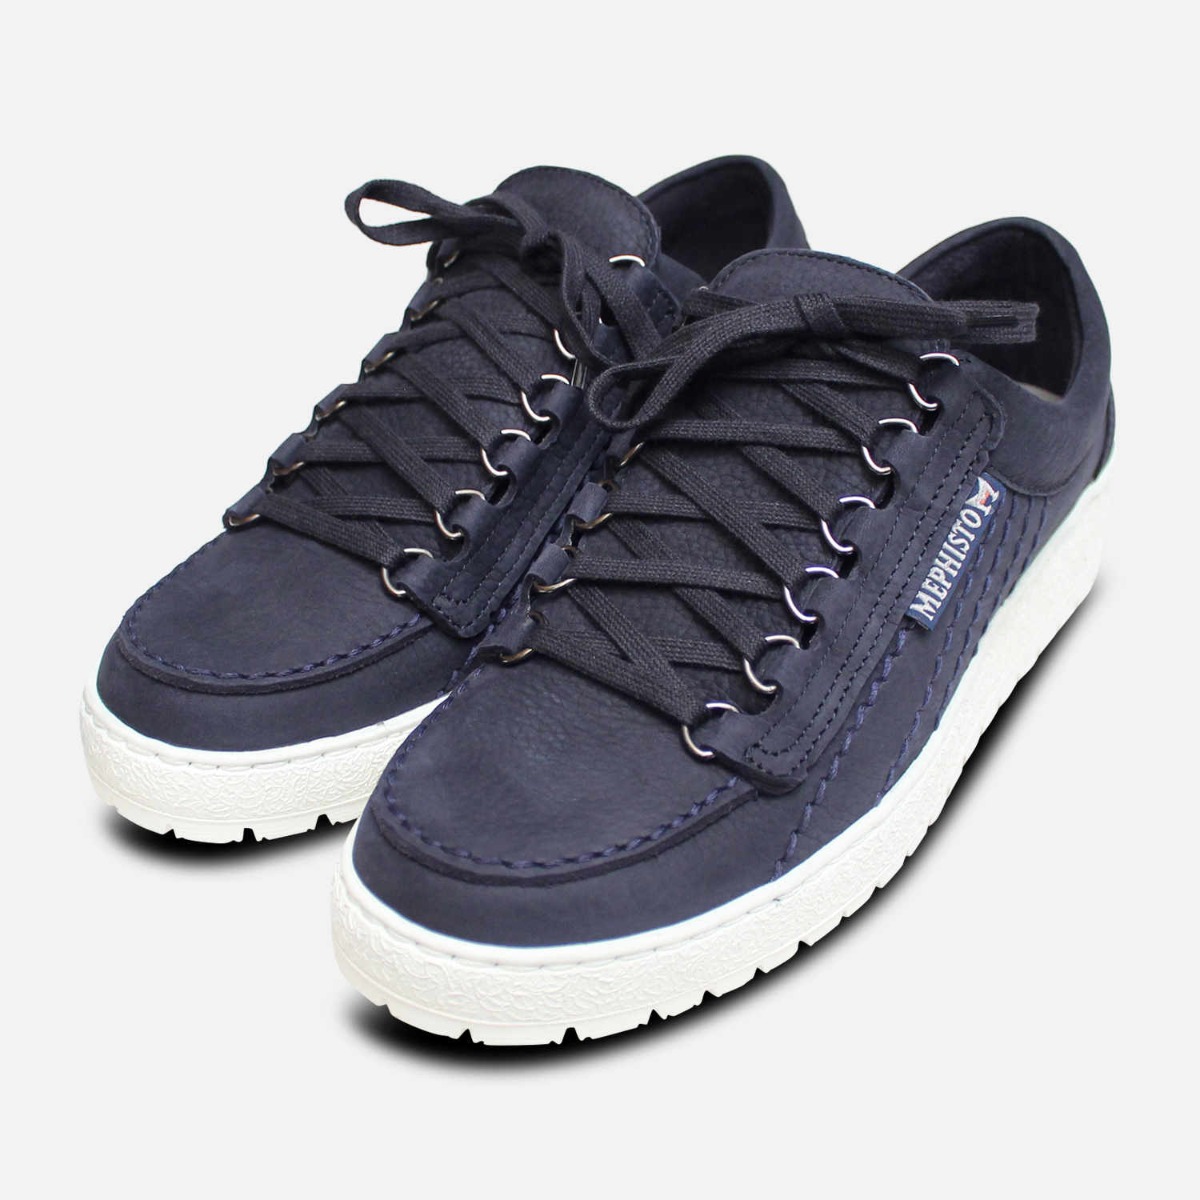 mephisto sport shoes